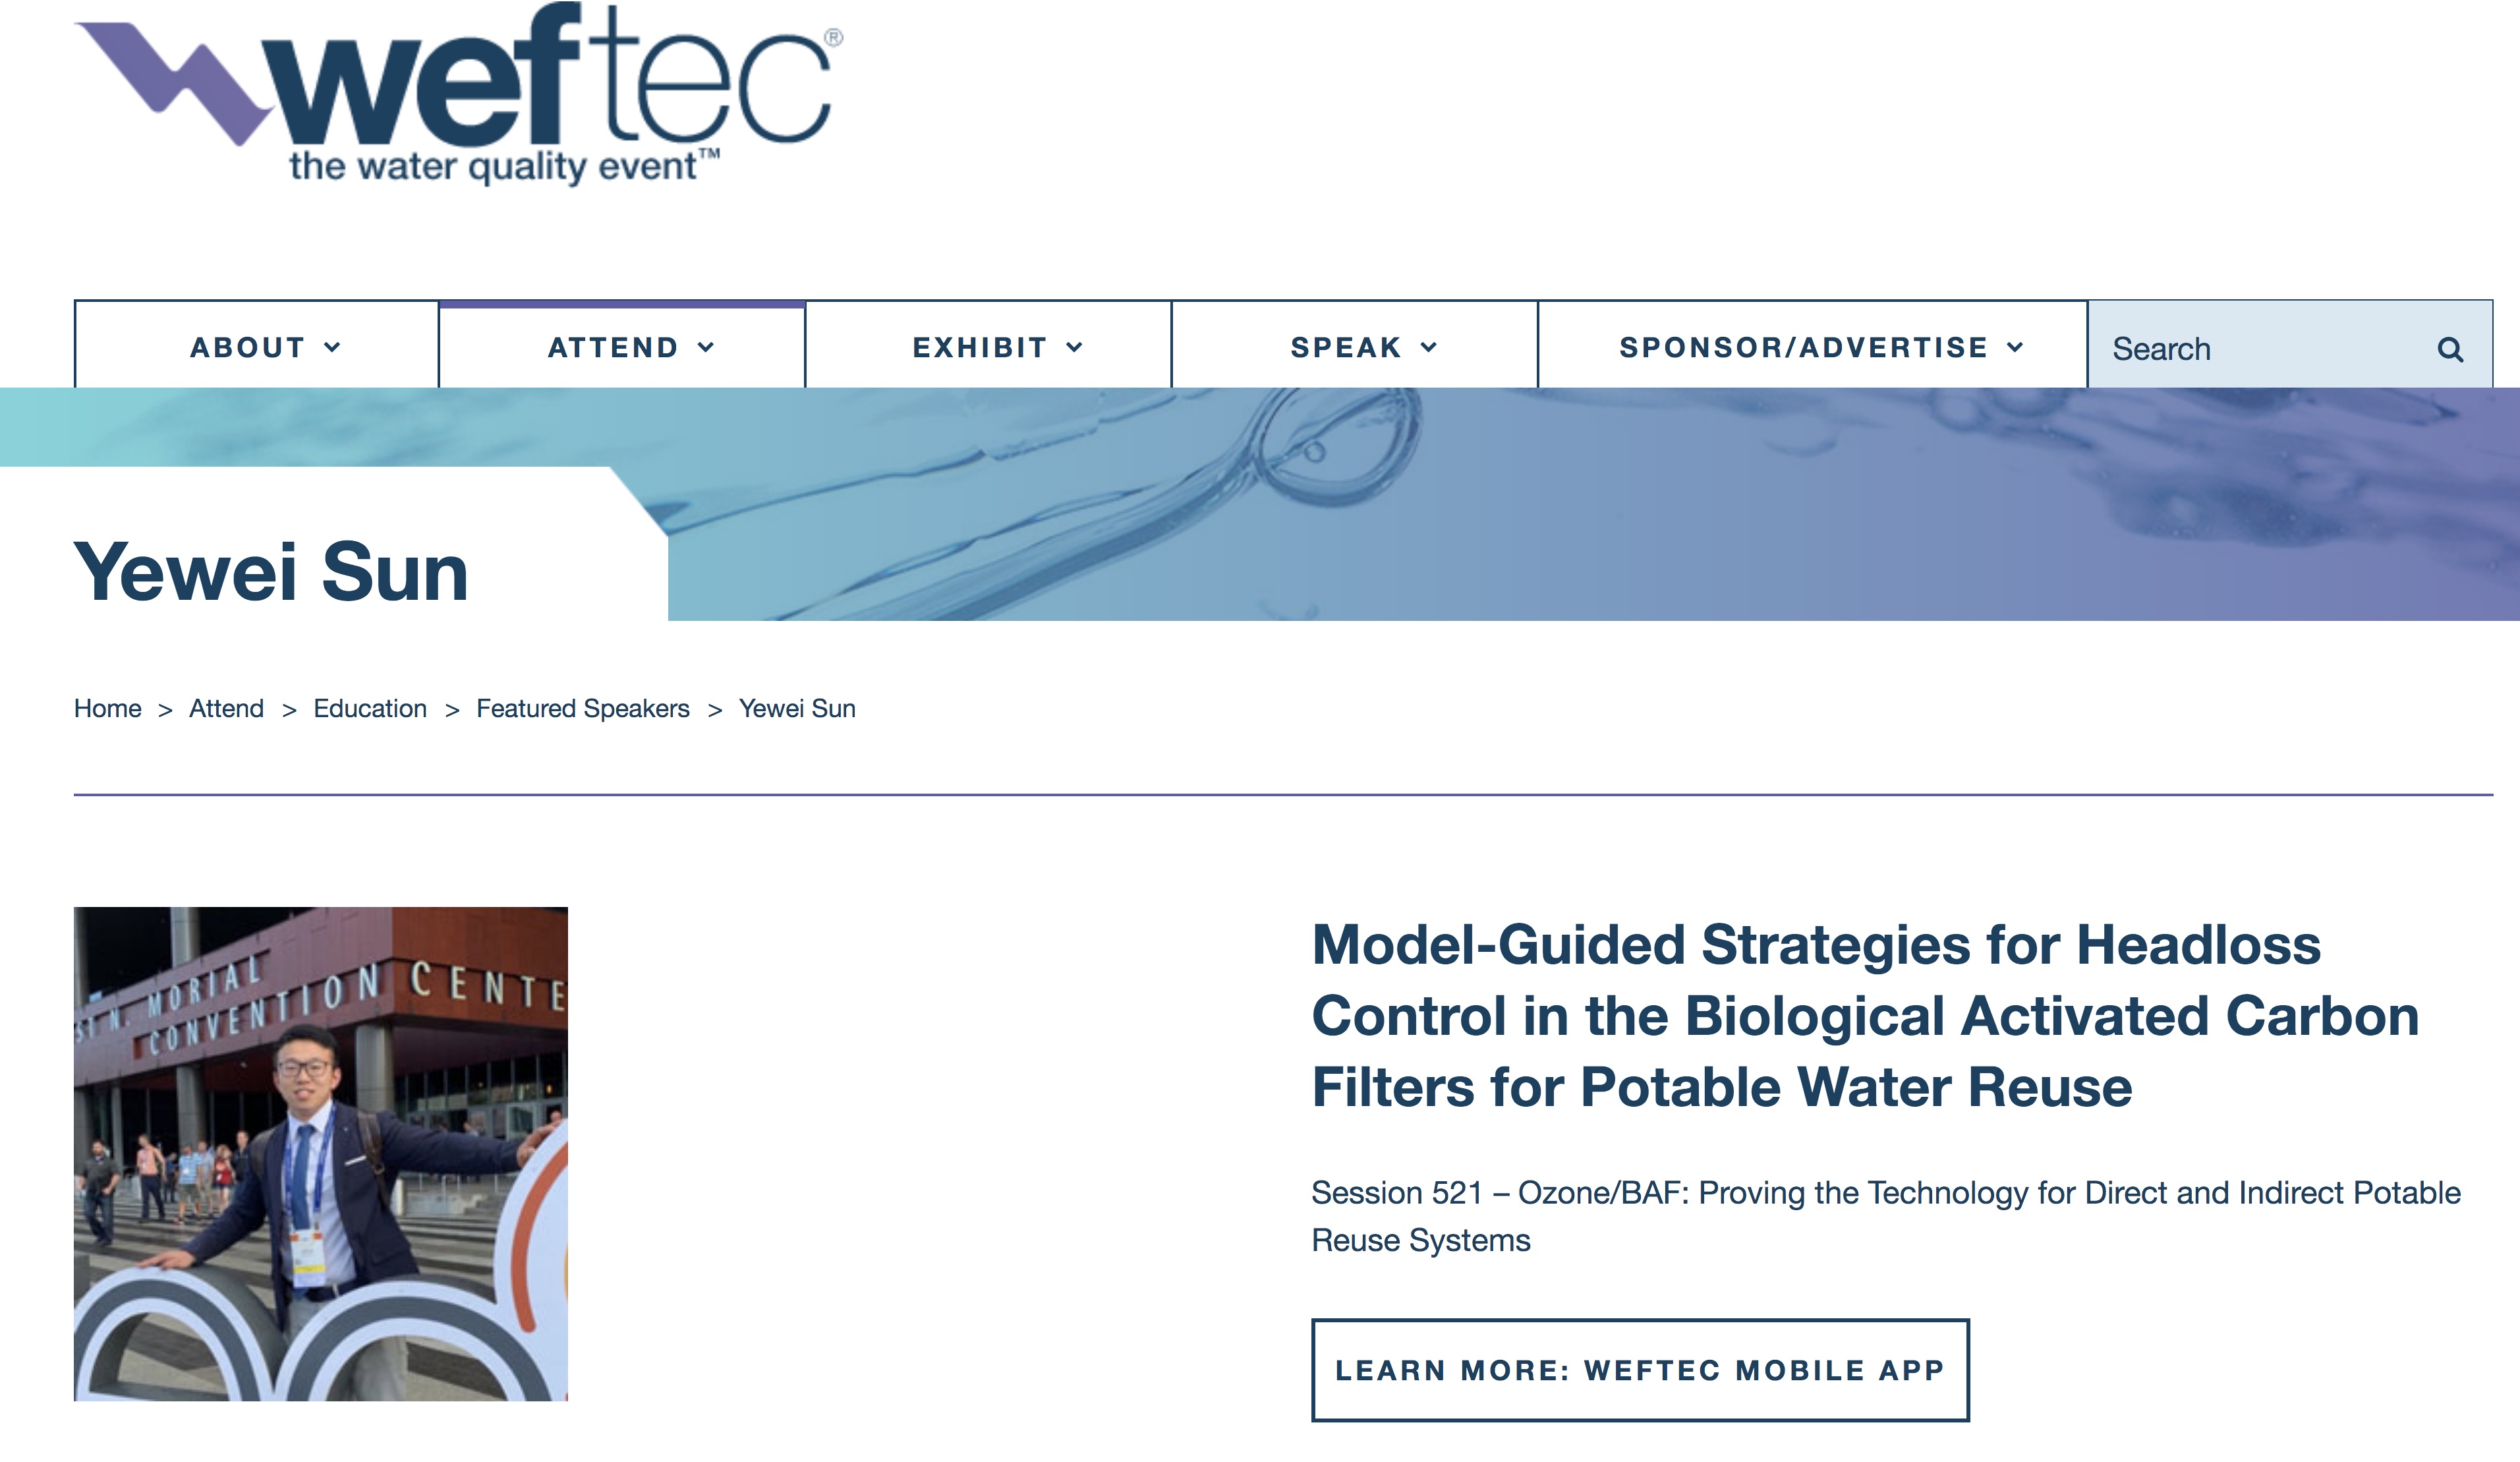 Yewei is selected as a “featured speaker” to present his biofiltration research in WEFTEC 2019.